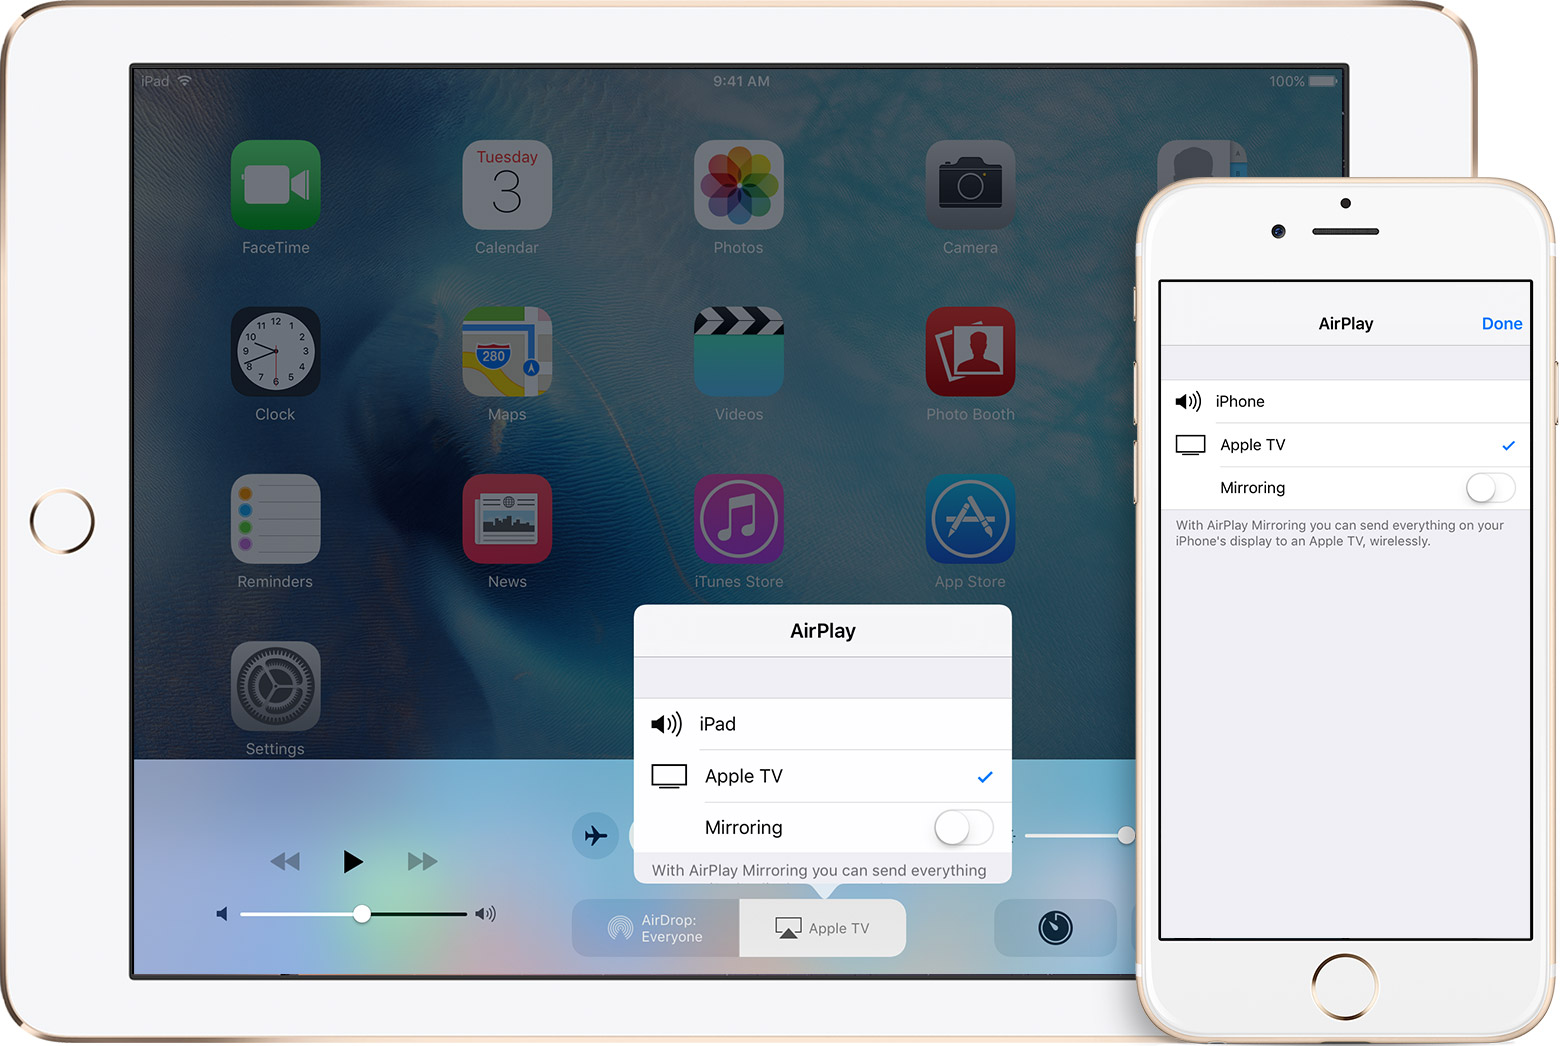 how-to-connect-iphone-or-ipad-to-your-tv-hdmi-cable-or-airplay-with-apple-tv